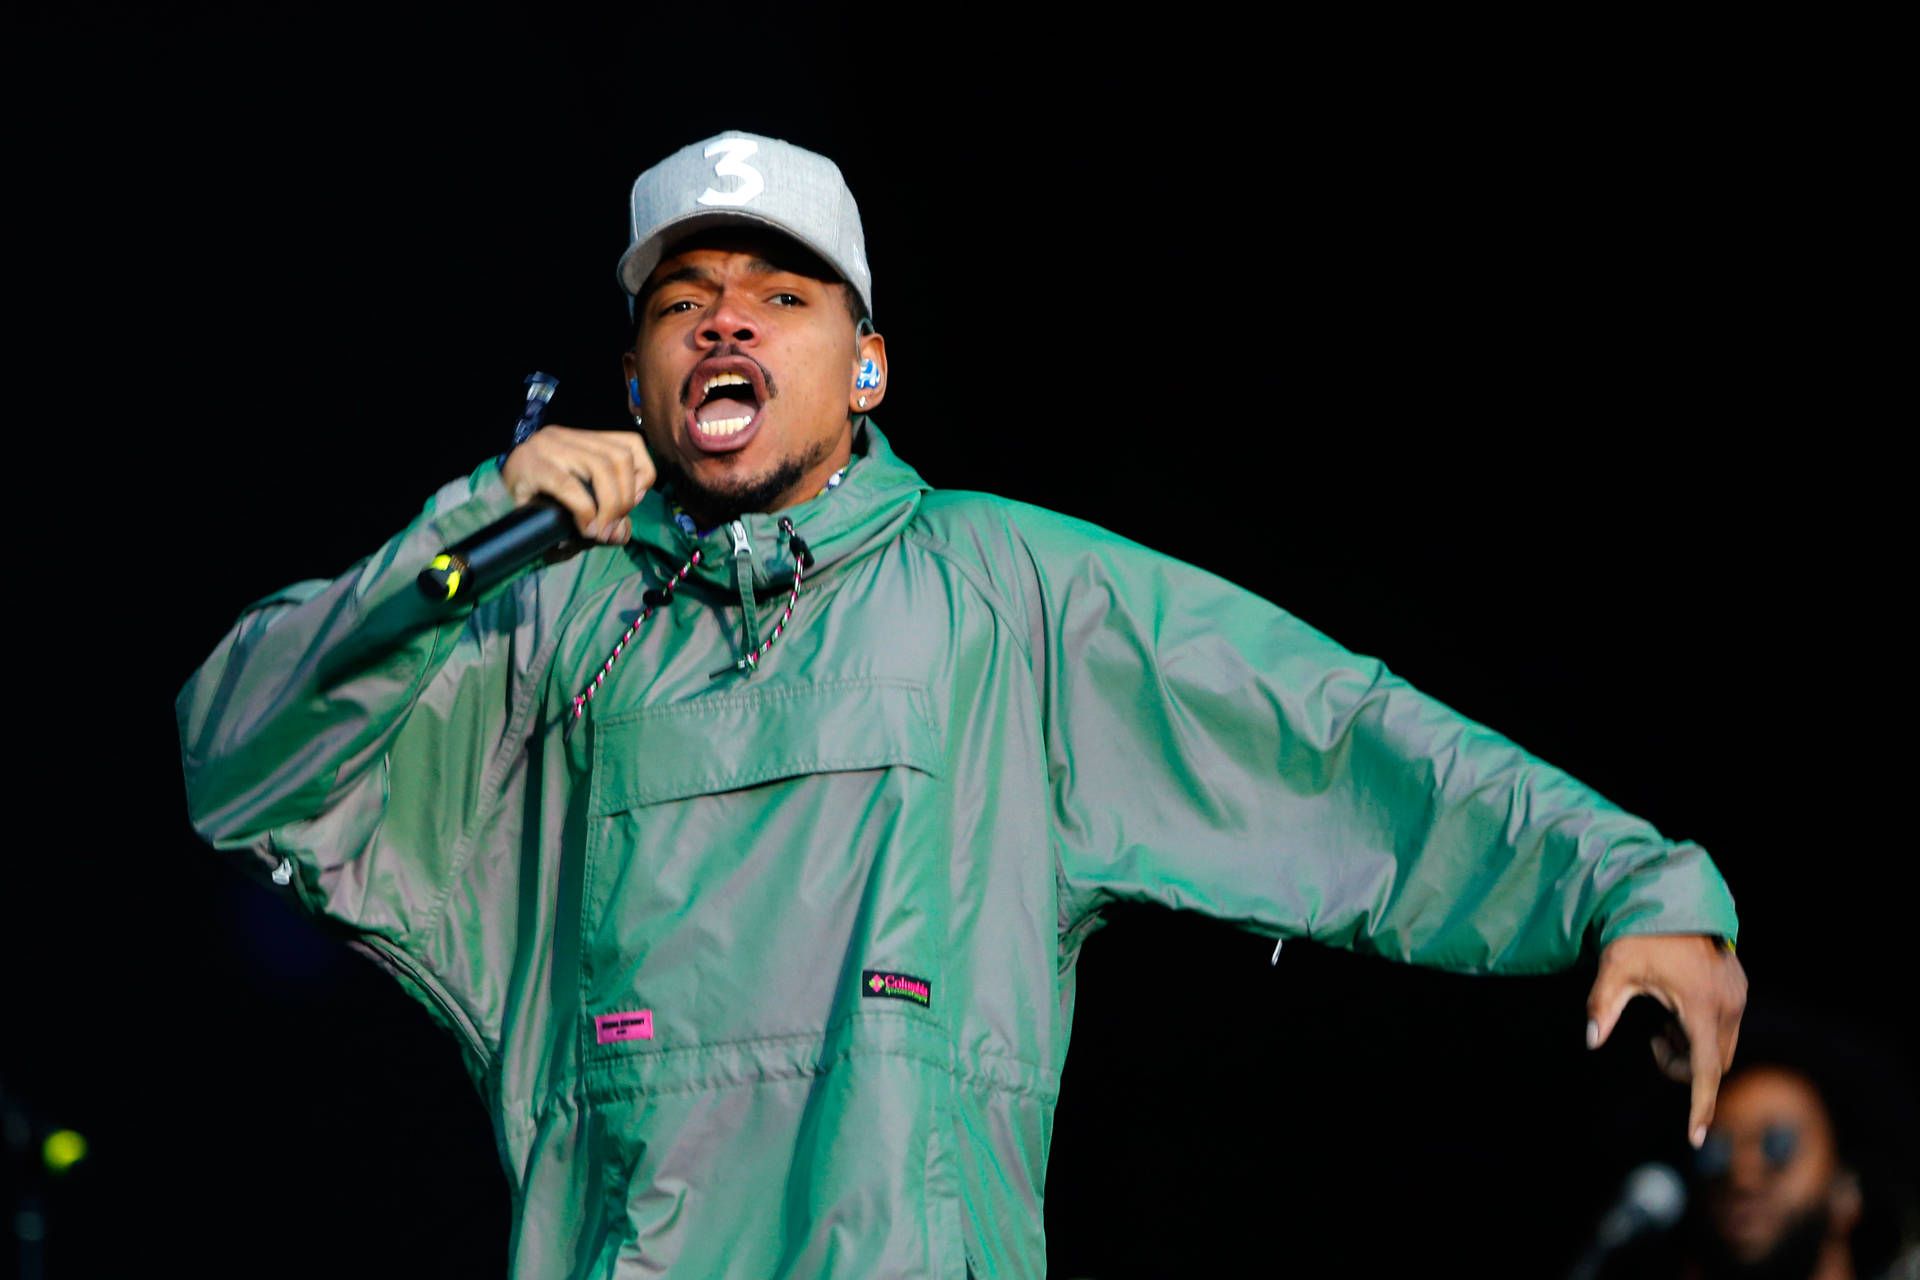 Chance The Rapper performs at the 2017 Pitchfork Music Festival in Chicago. - Chance the Rapper